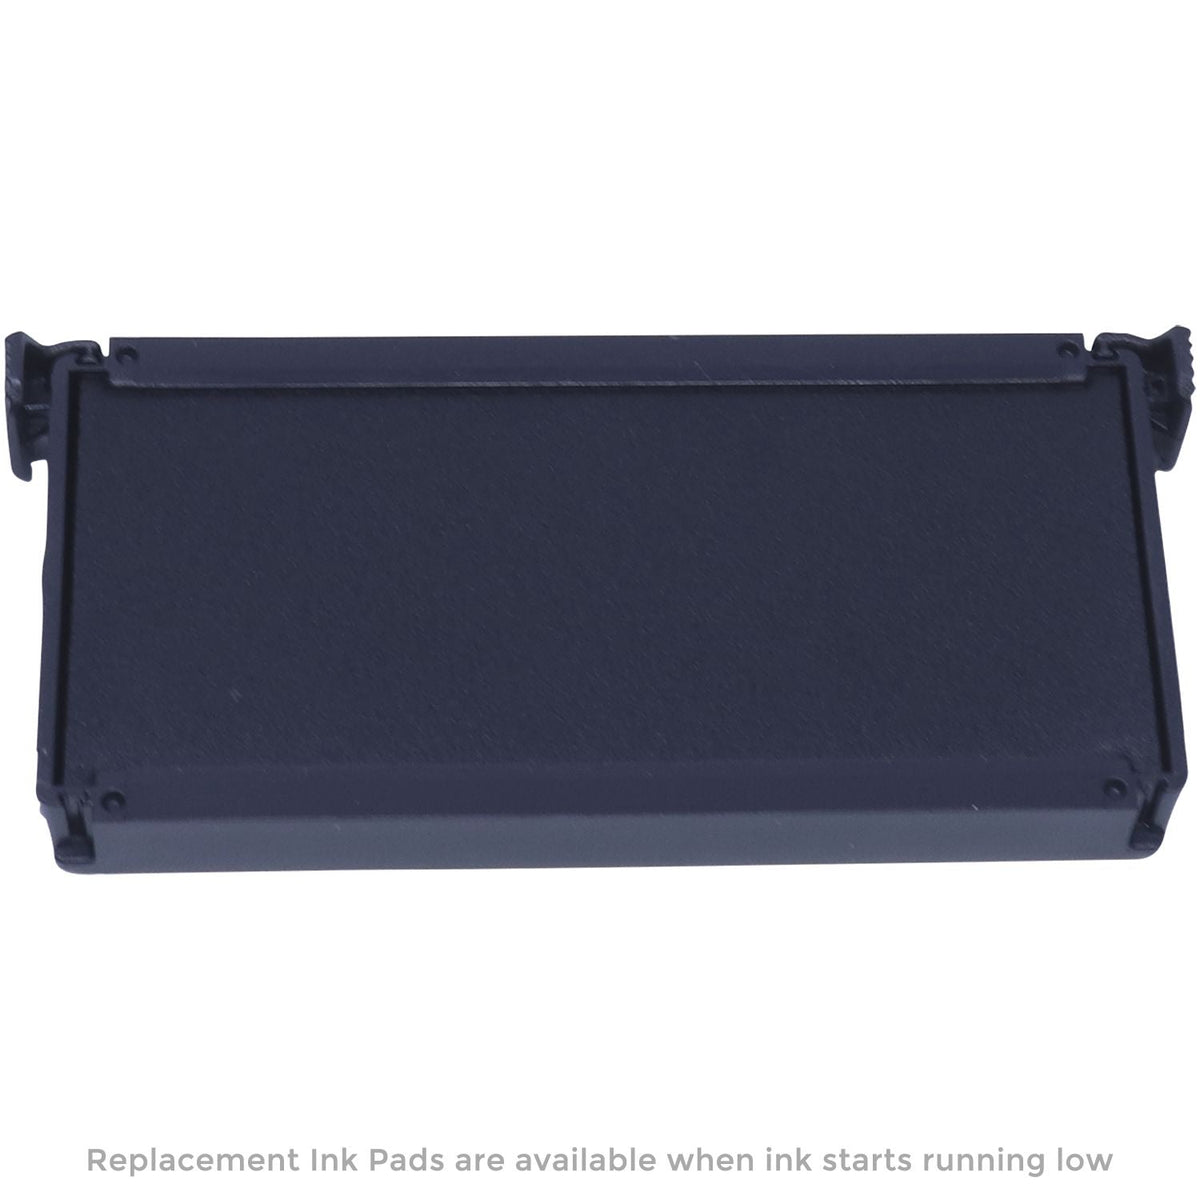 Replacement Pad for Self Inking Refinance Stamp